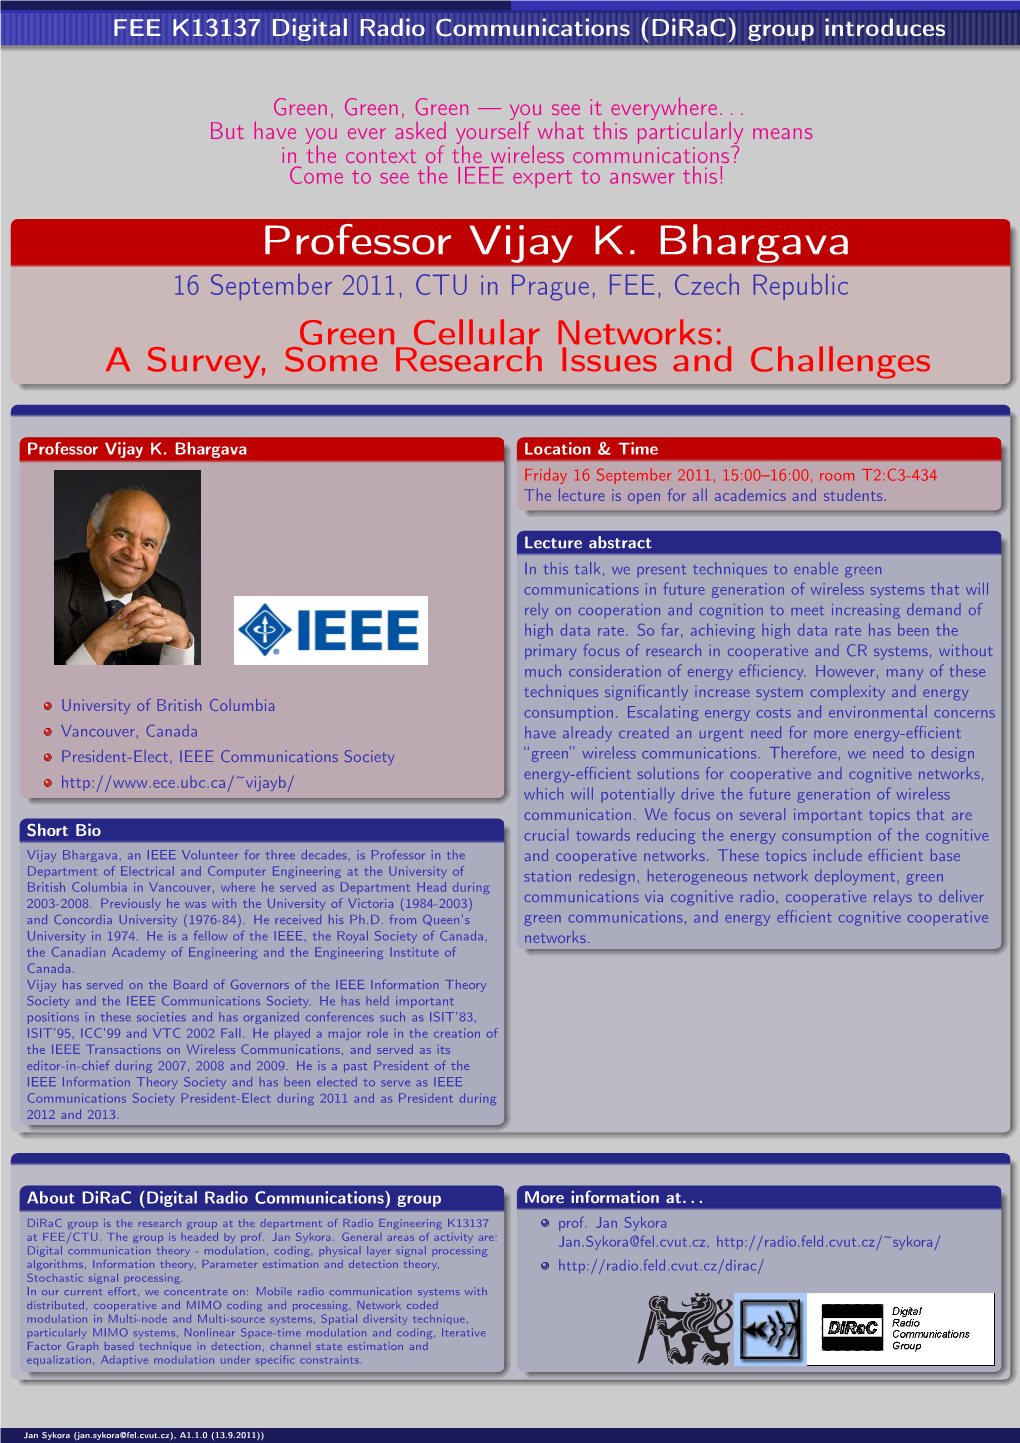 Professor Vijay K. Bhargava 16 September 2011, CTU in Prague, FEE, Czech Republic Green Cellular Networks: a Survey, Some Research Issues and Challenges